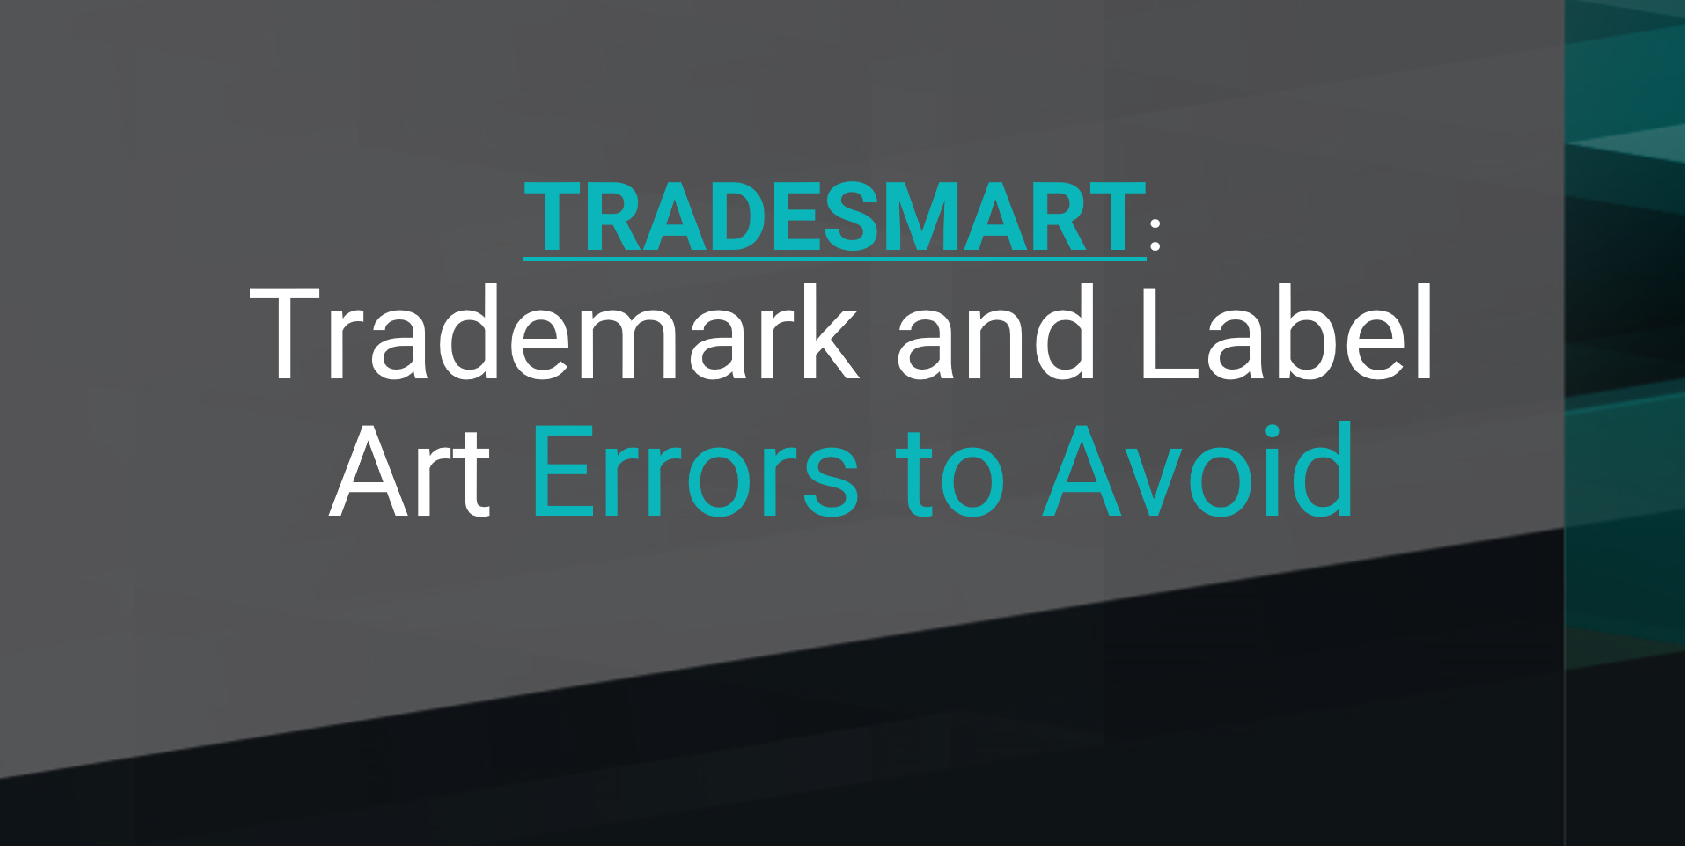 Trademark and Label Art Errors to Avoid